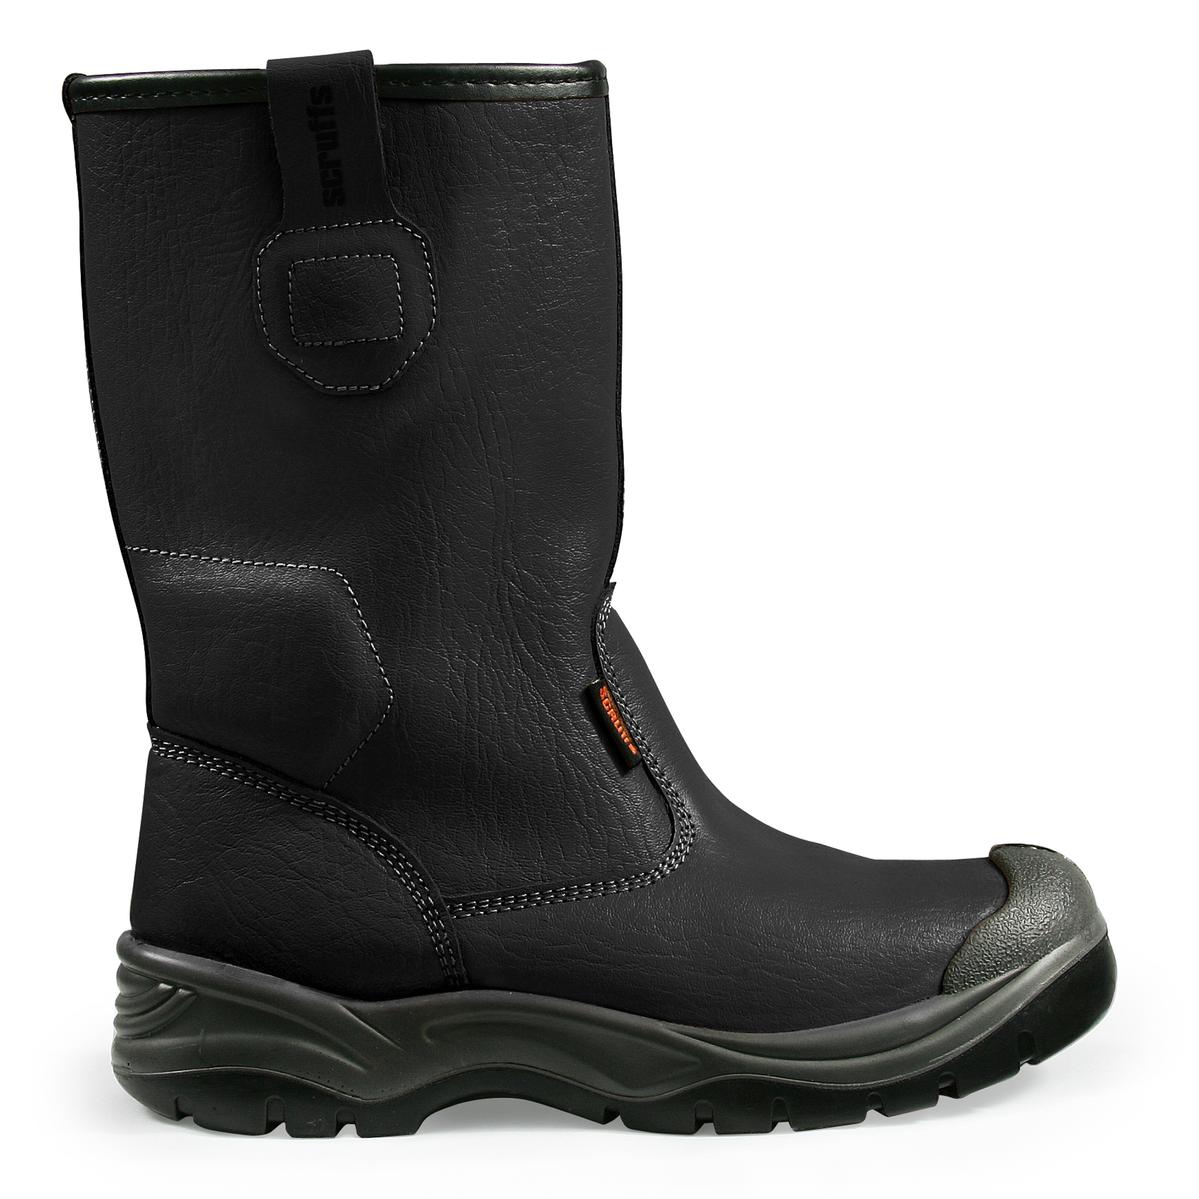 Gravity Rigger Boots Black Size 12